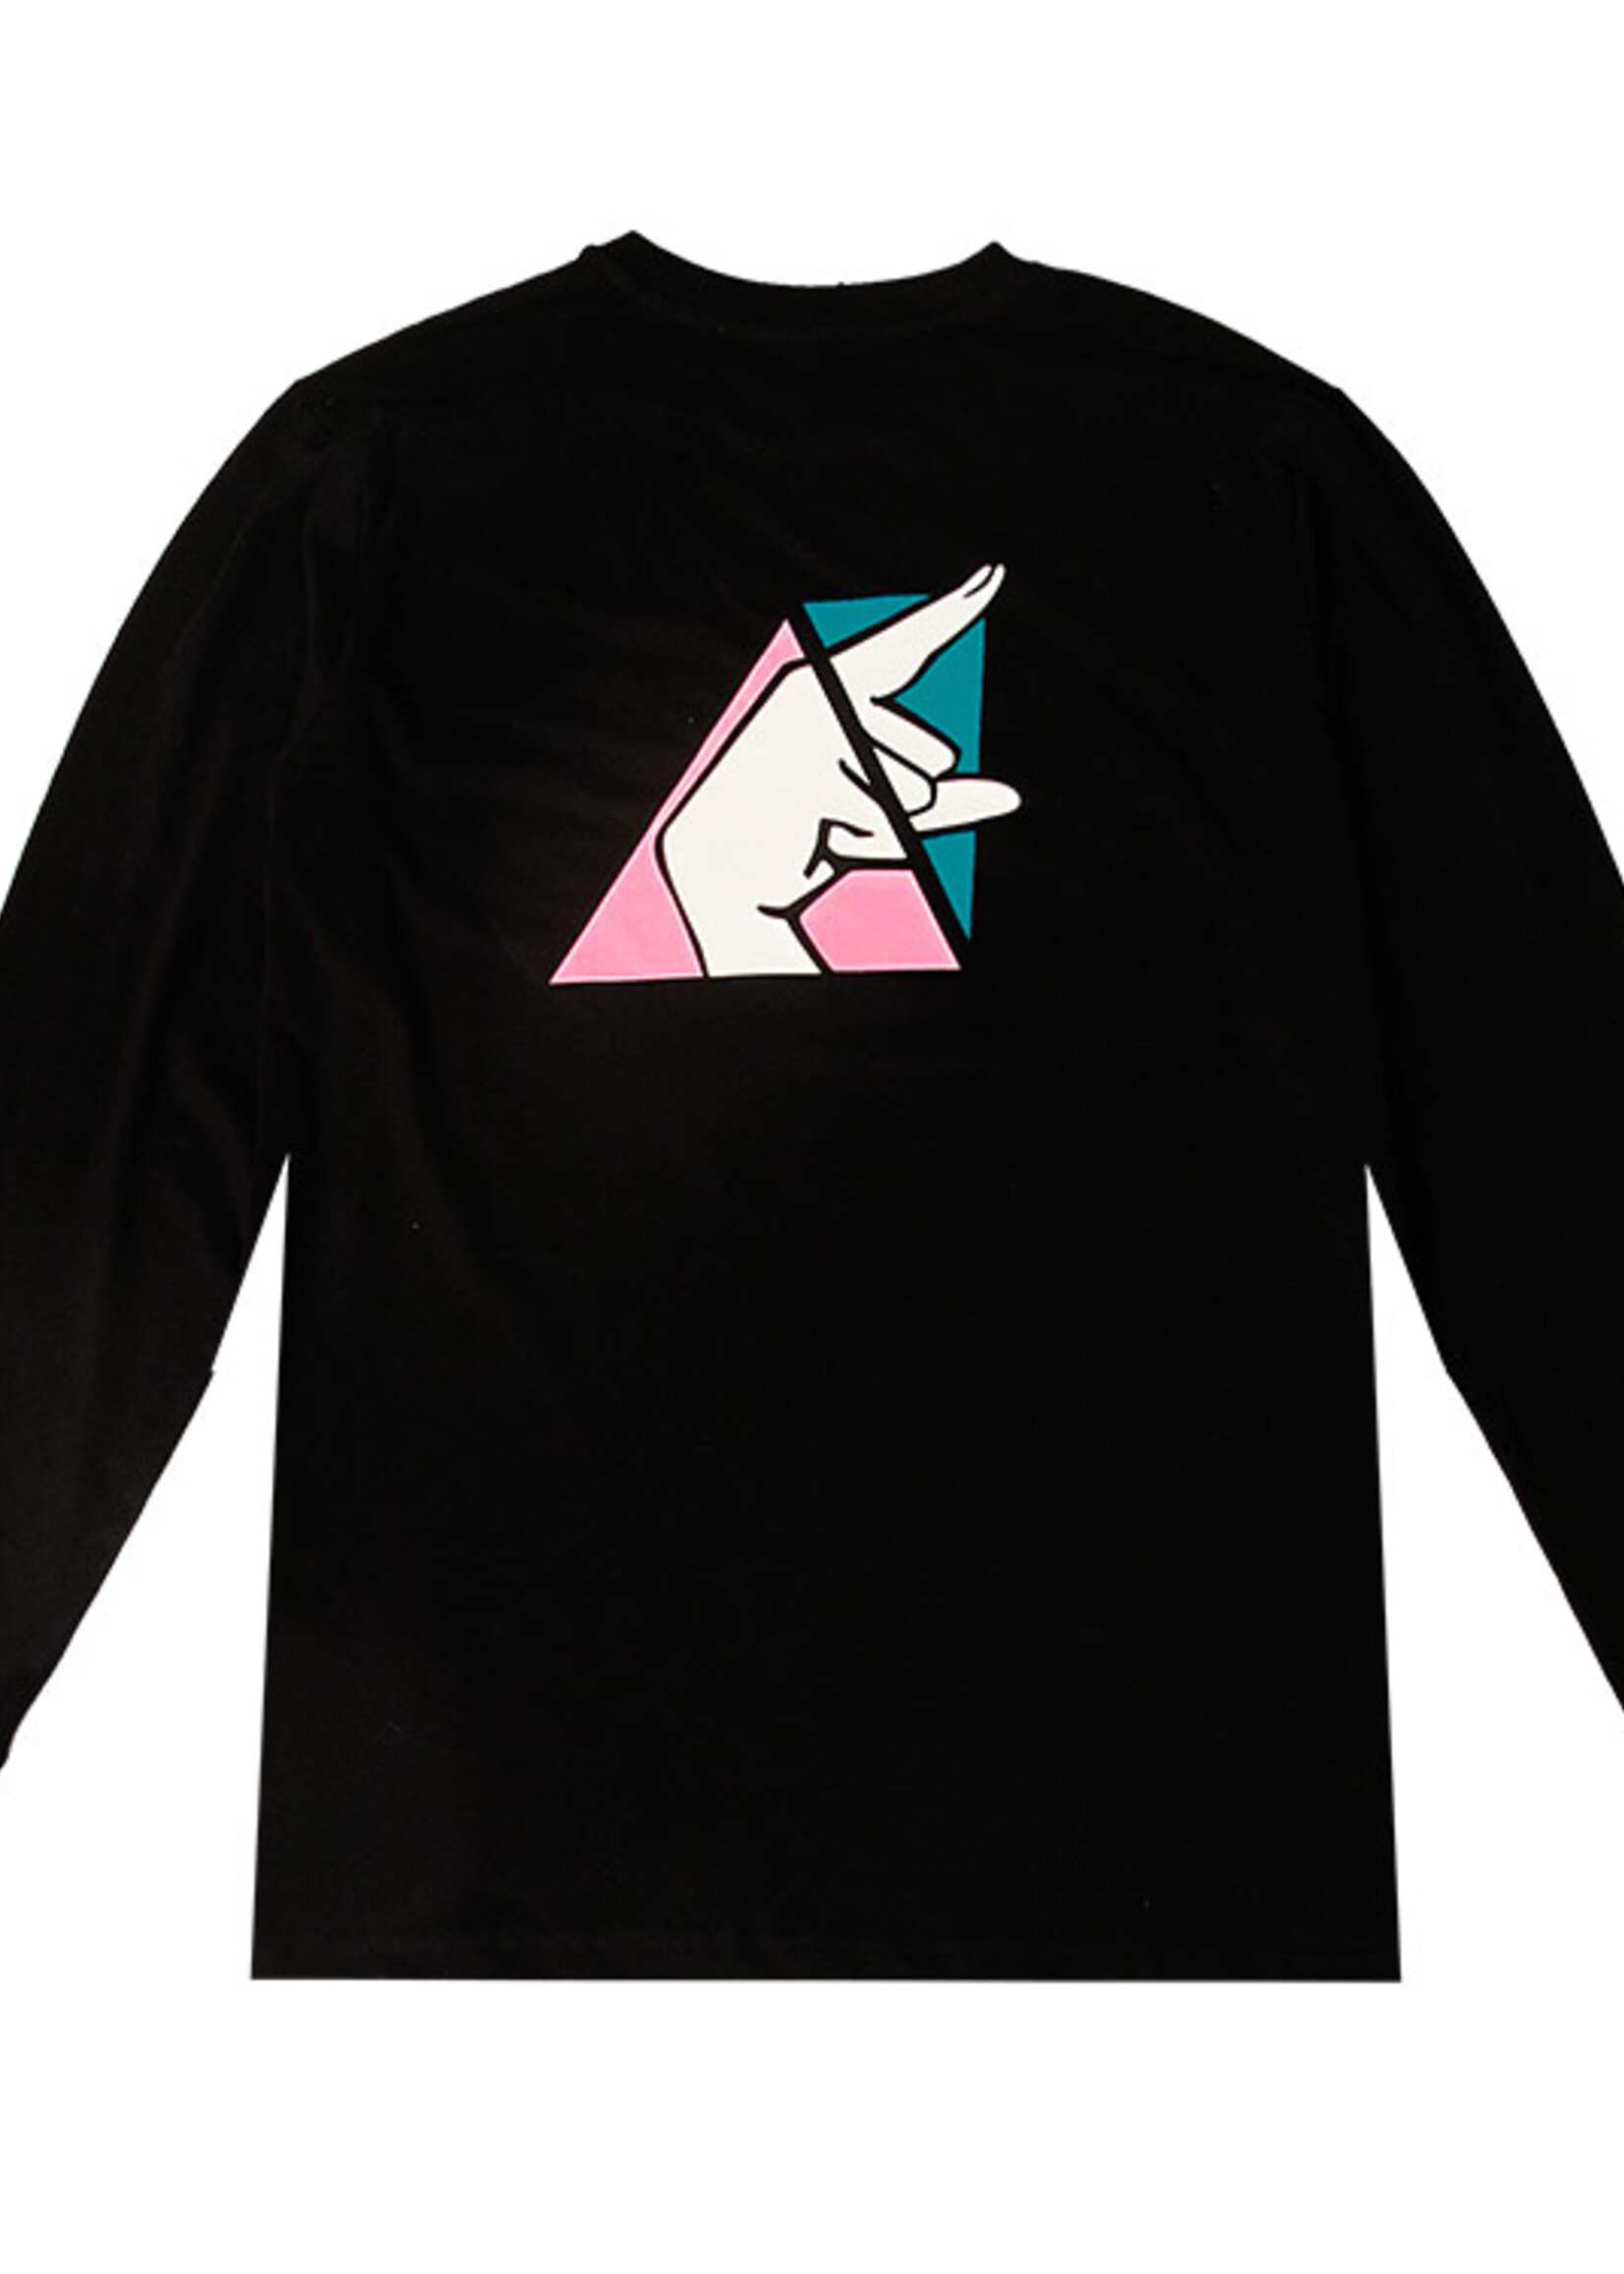 Check Clothing Check Clothing Pointing At The Future Longsleeve Black